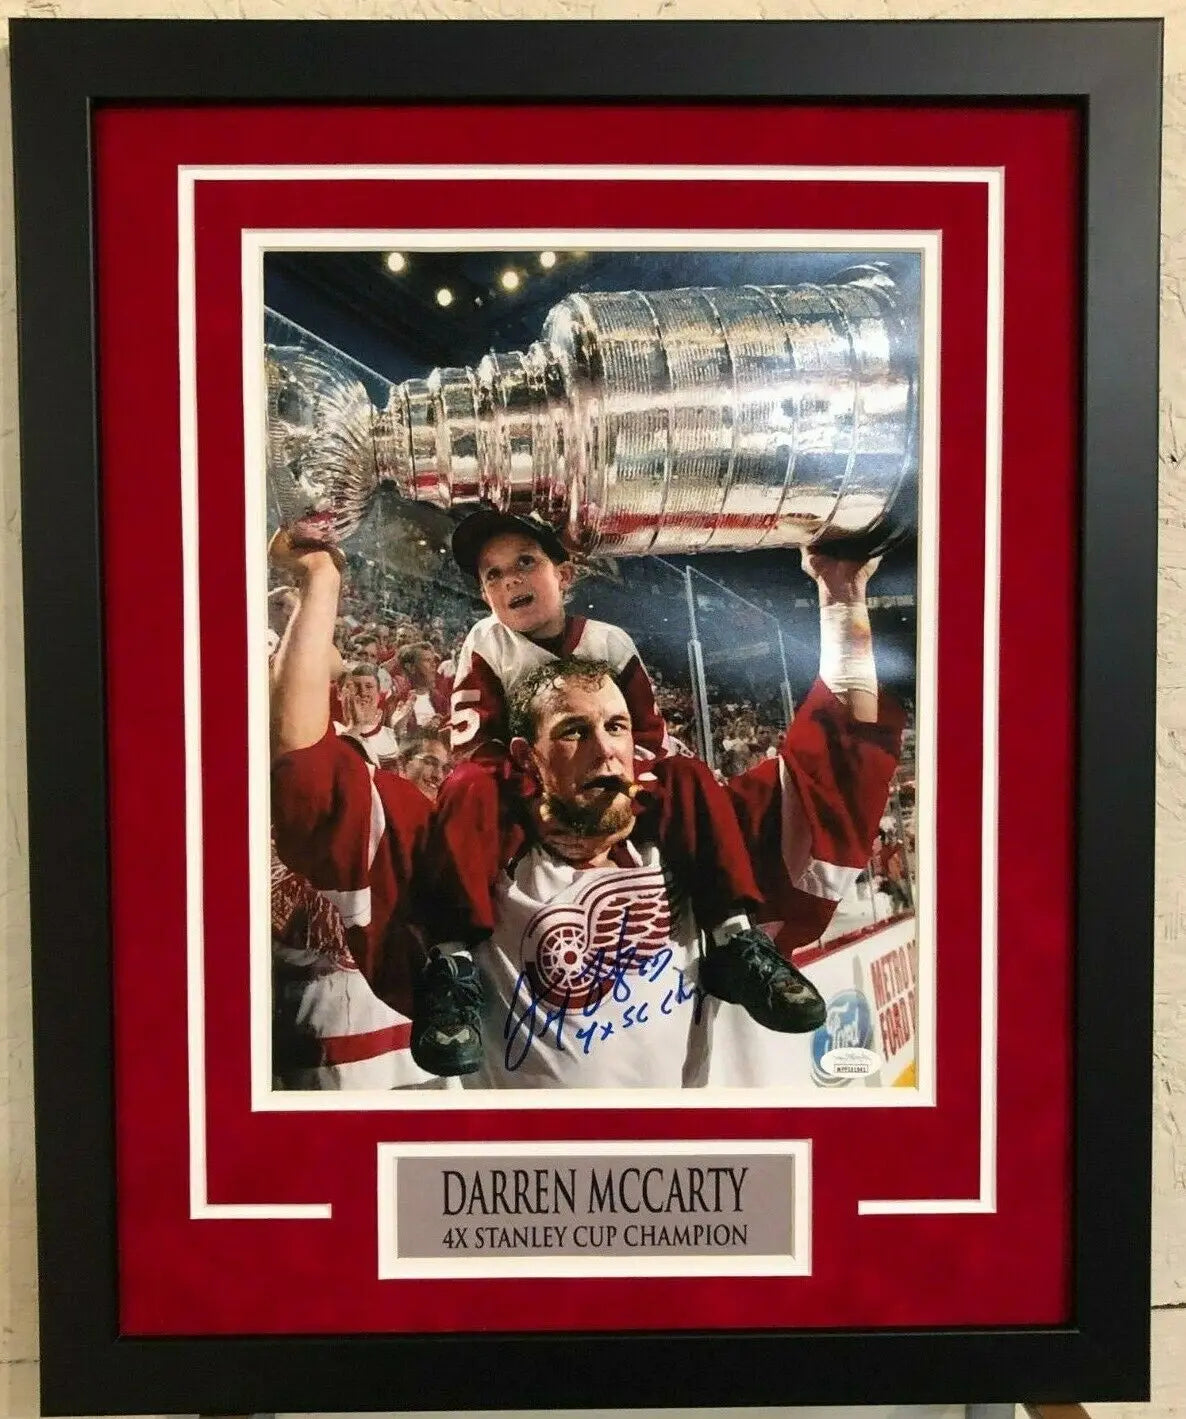 MVP Authentics Framed Darren Mccarty Signed Inscribed Detroit Red Wings 11X14 Photo Jsa Coa 125.10 sports jersey framing , jersey framing